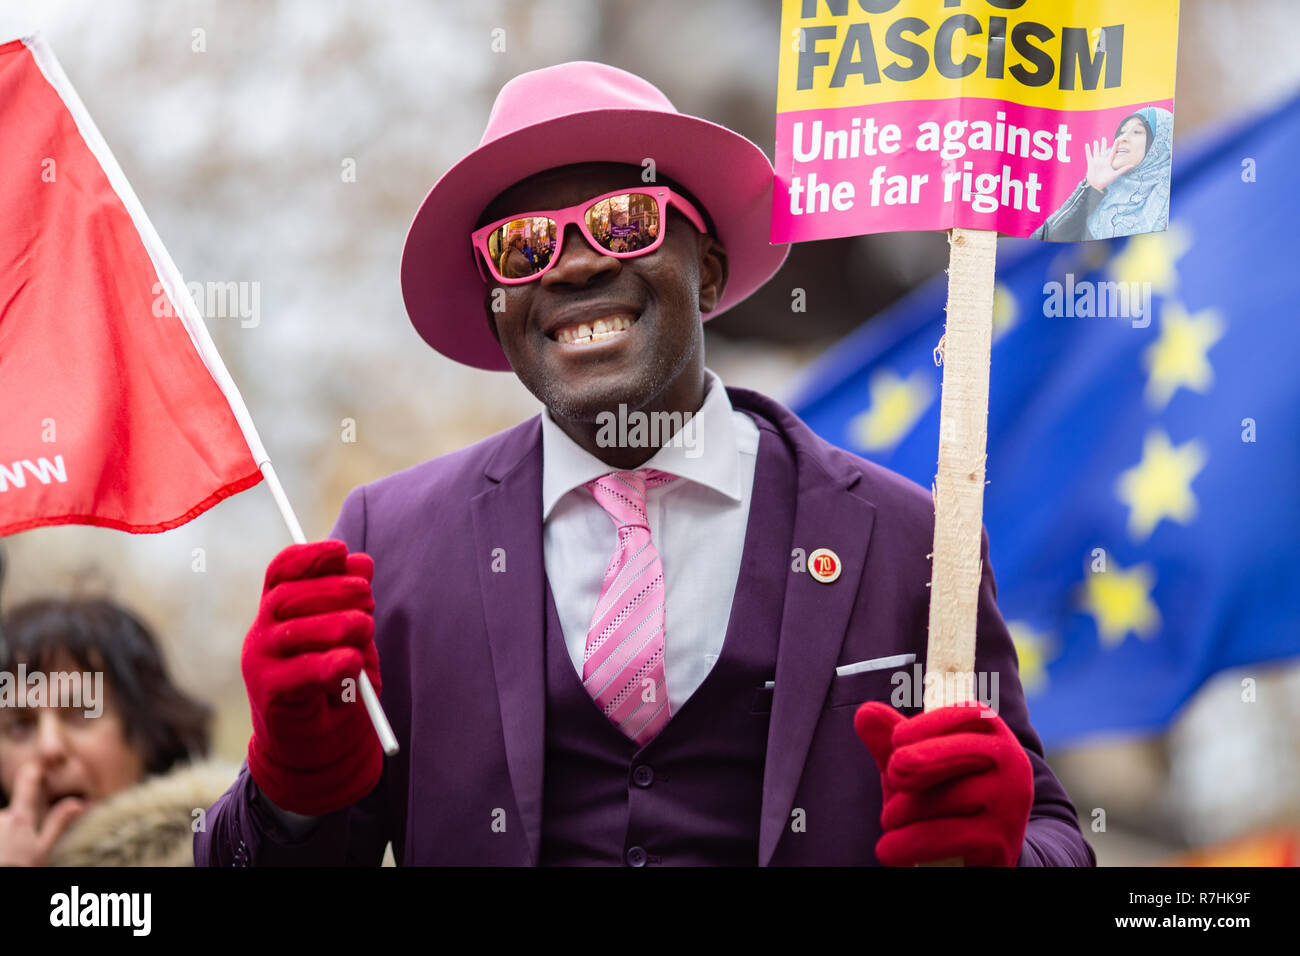 An Anti-Facist demonstrator holds up a 'unite against the far right' sign.   3,000 Pro-Brexit demonstrators and 15,000 Anti-Facist counter demonstrators took to the streets of London to voice their stance on the deal ahead of the key Brexit vote in parliament this Tuesday. Stock Photo